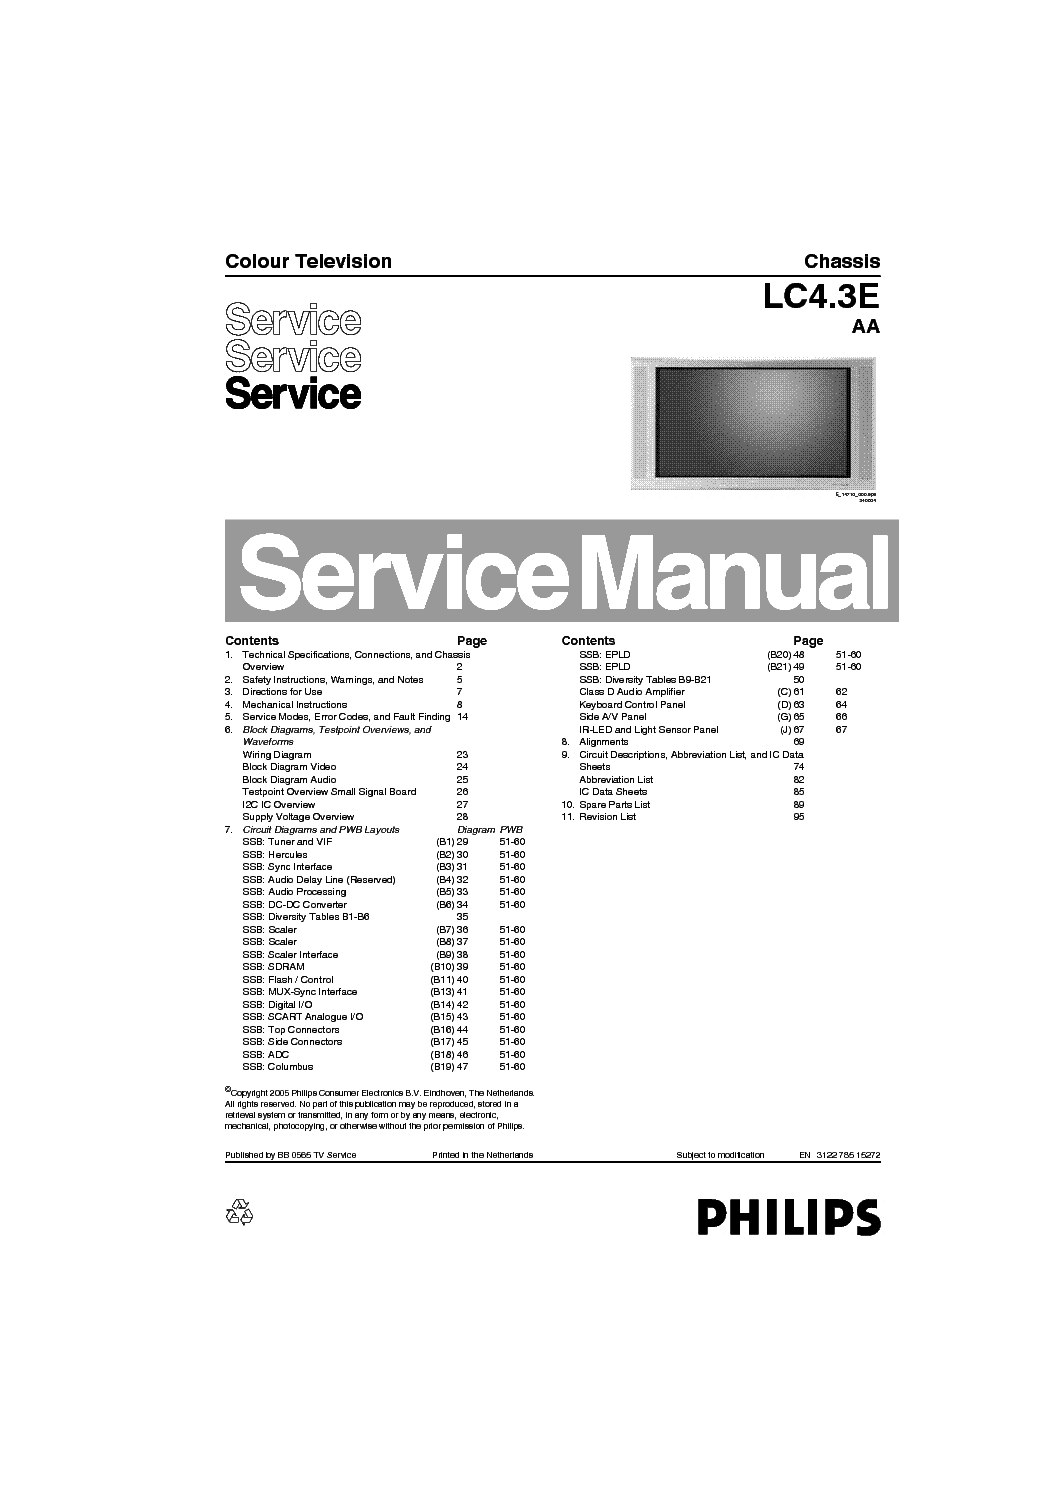 PHILIPS CHASSIS LC4.3E-AA SM service manual (1st page)